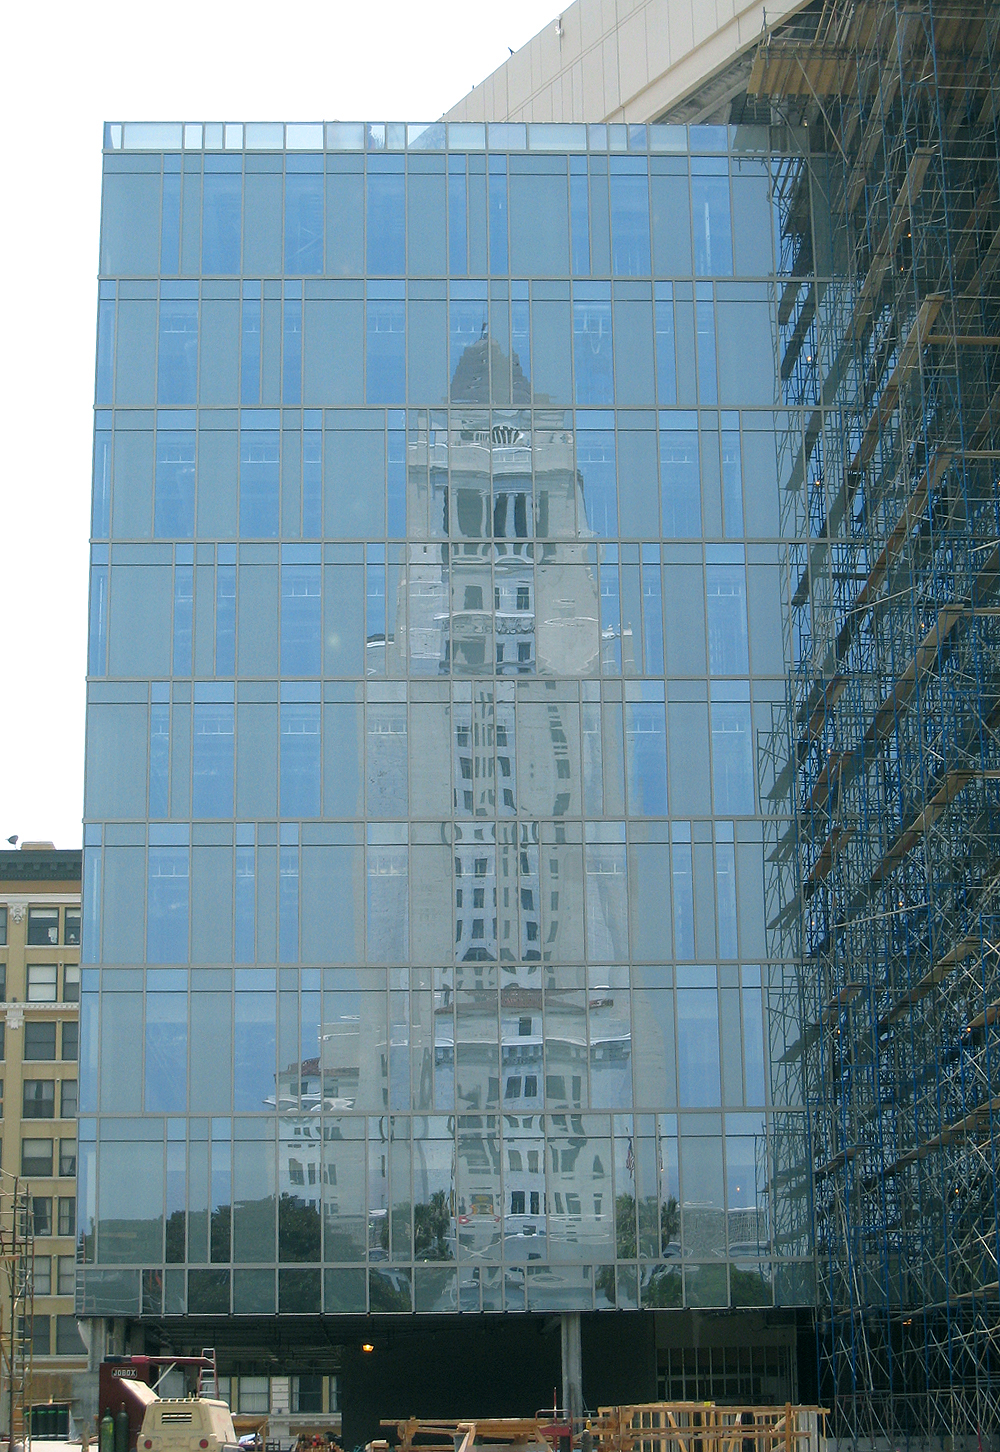 Los Angeles Police Department, Entrance facade during construction, with reflection in window of LA City Hall (photo: © Jeremy White)